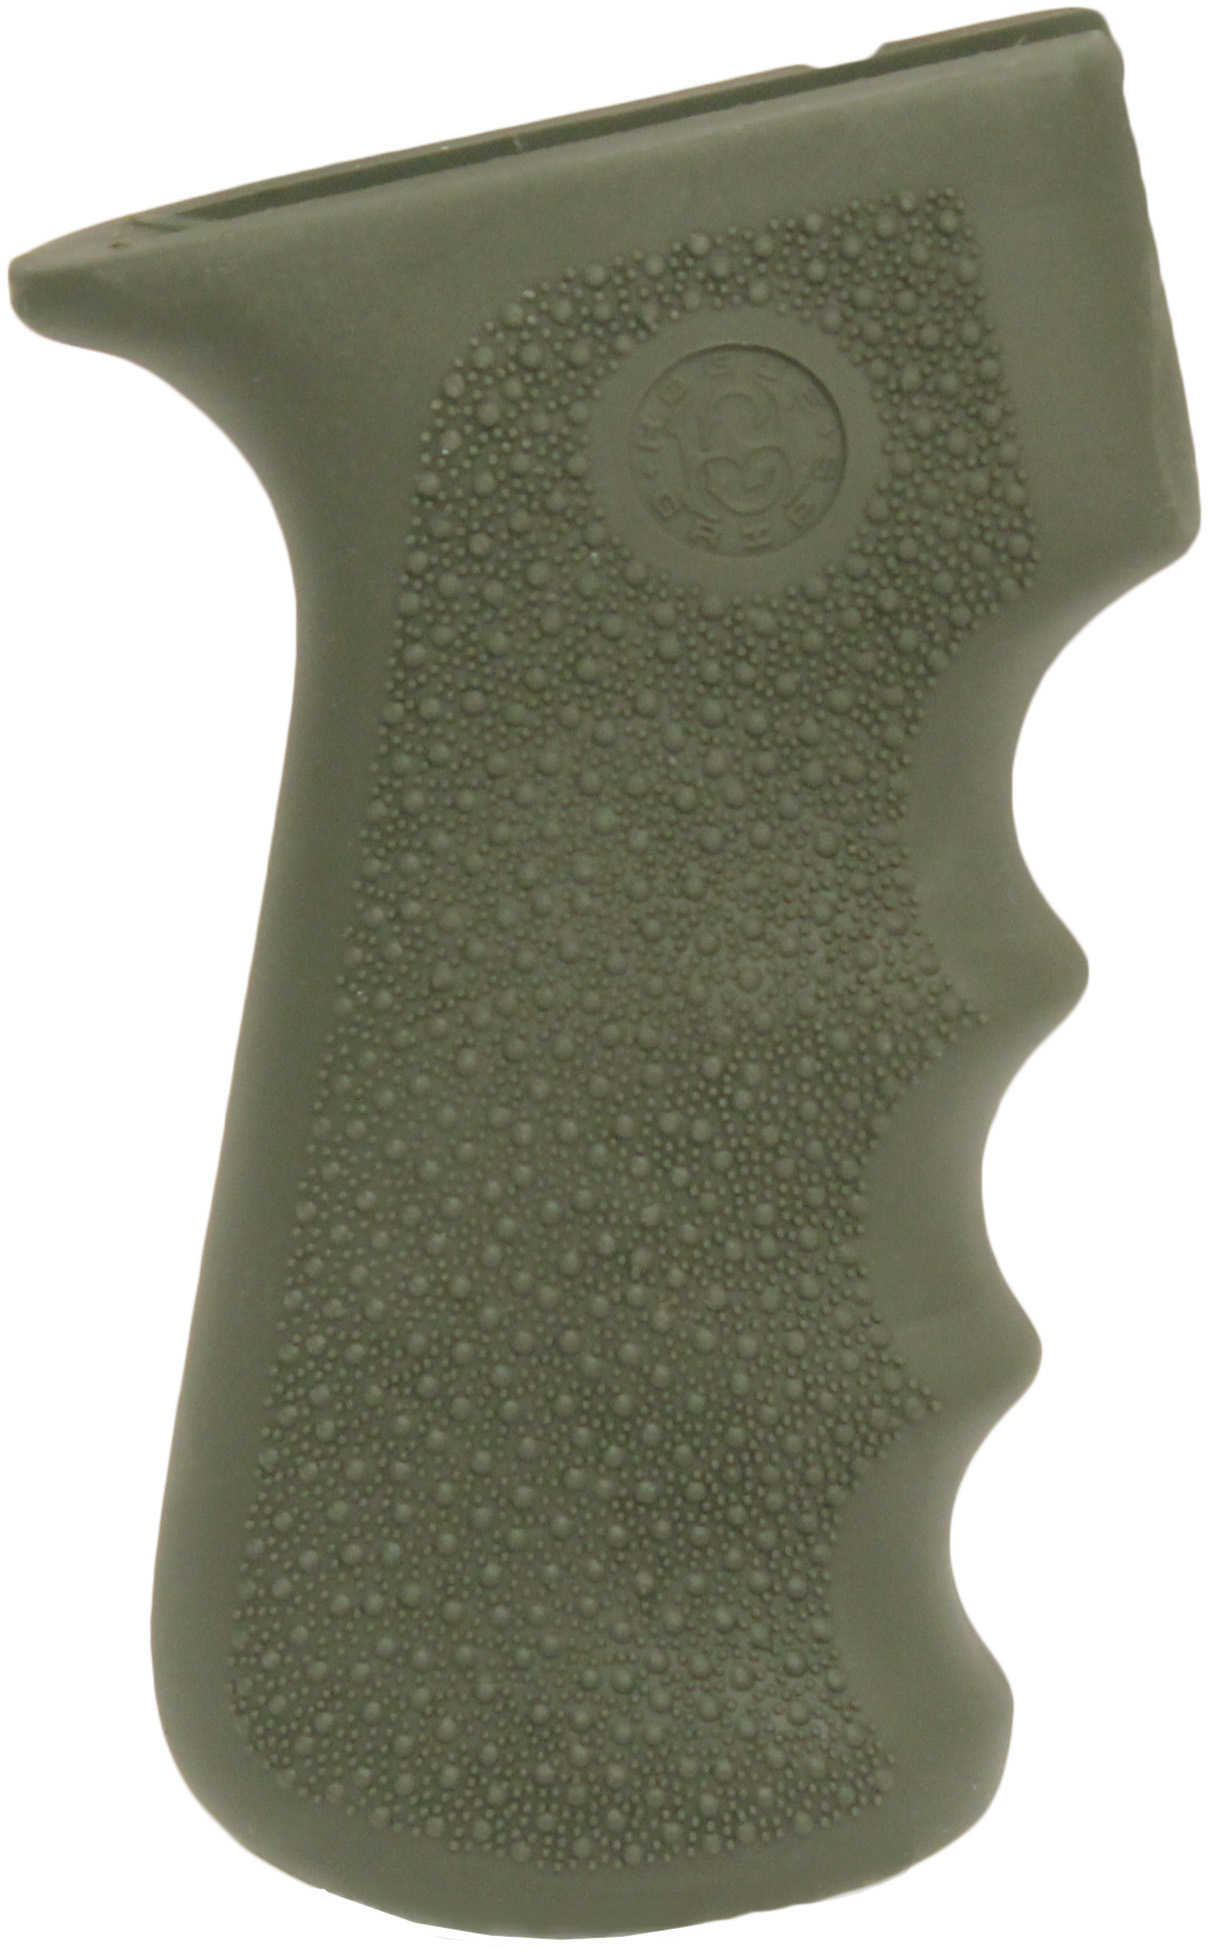 Hogue Grips Overmolded Rifle Fits AK-47/AK-74 Finger Grooves Rubber OD Green 74001